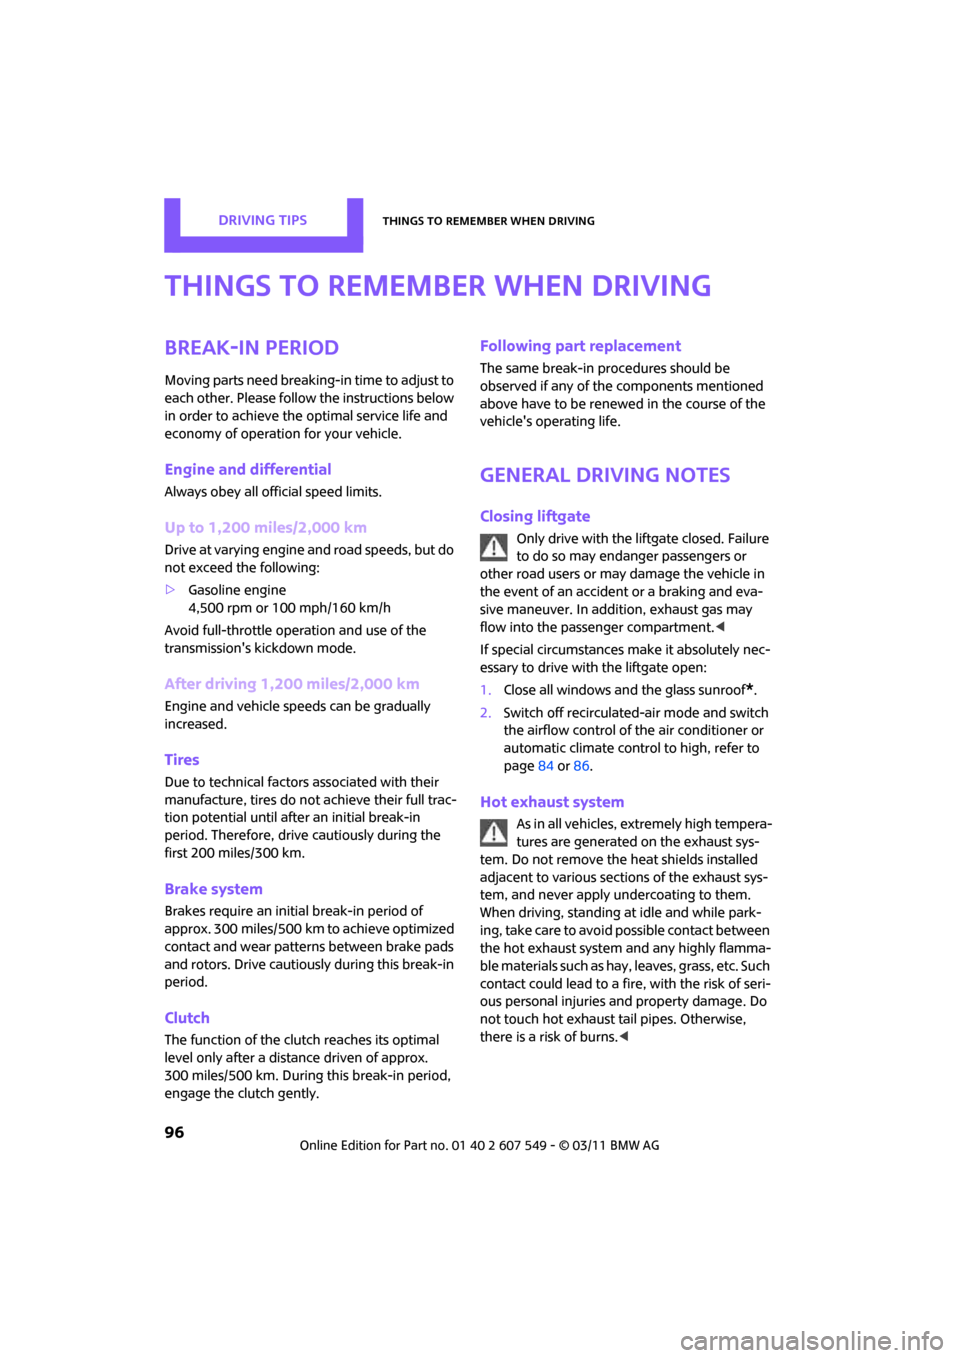 MINI Countryman 2011  Owners Manual (Mini Connected) DRIVING TIPSThings to remember when driving
96
Things to remember when driving
Break-in period
Moving parts need breaking-in time to adjust to 
each other. Please follow the instructions below 
in ord